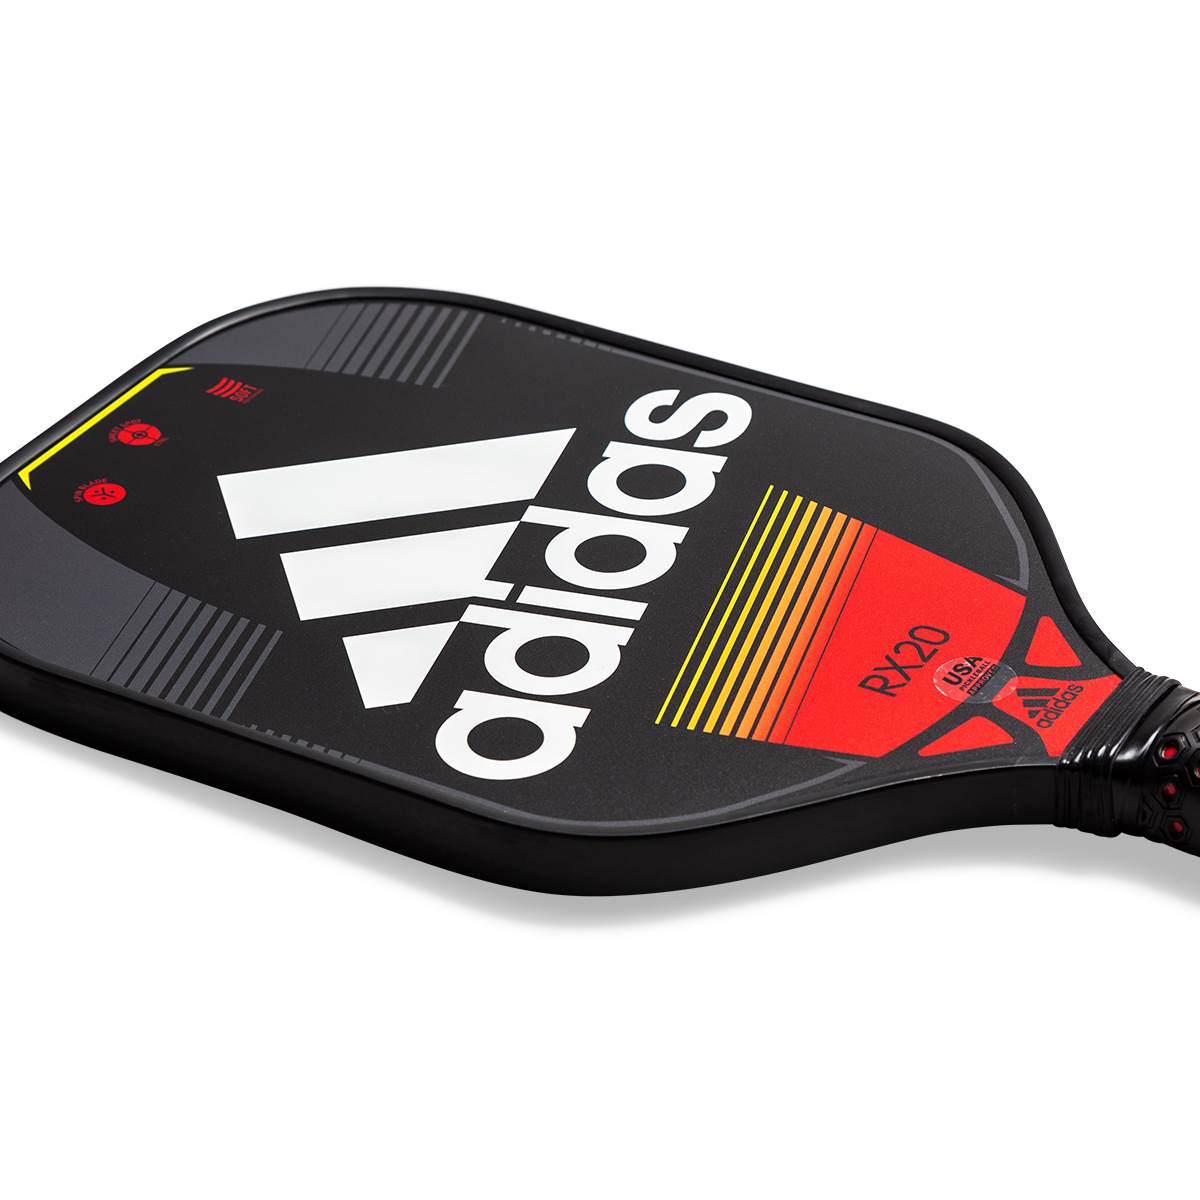 Adidas RX20 Middleweight Pickleball Paddle